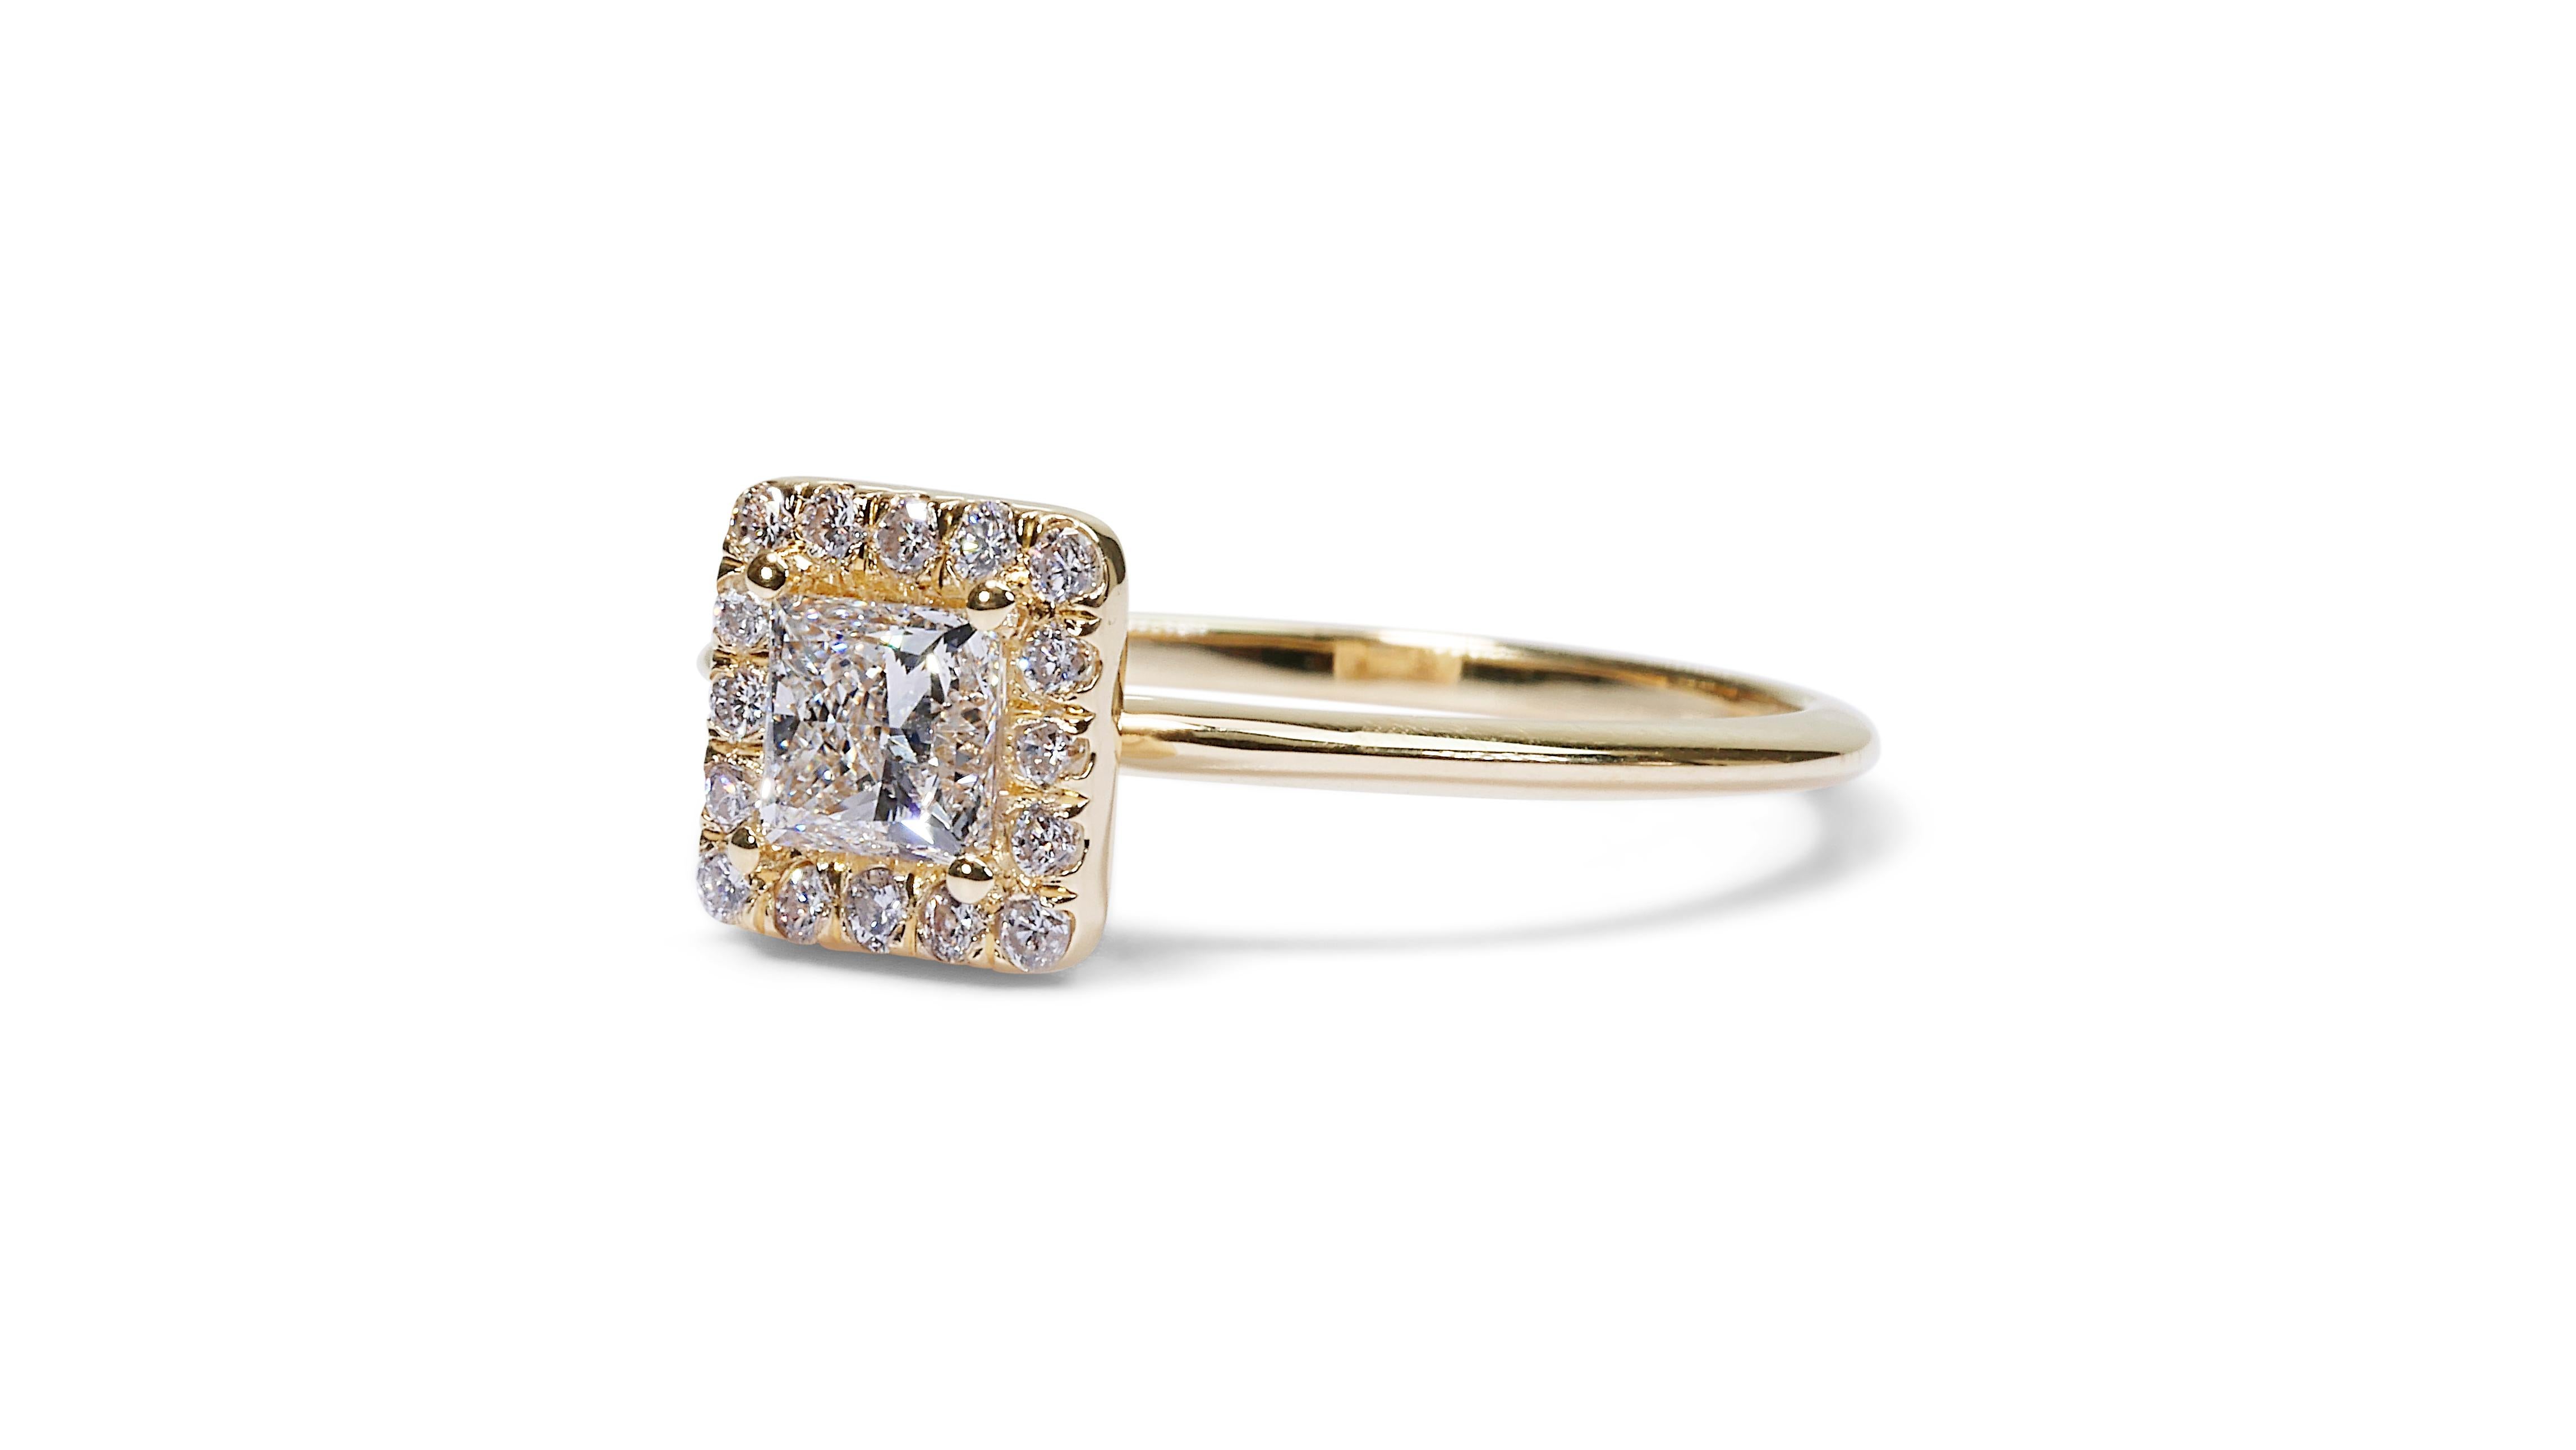 Square Cut Charming 0.90ct Square-Cut Diamond Halo Ring in 18k Yellow Gold - GIA Certified For Sale